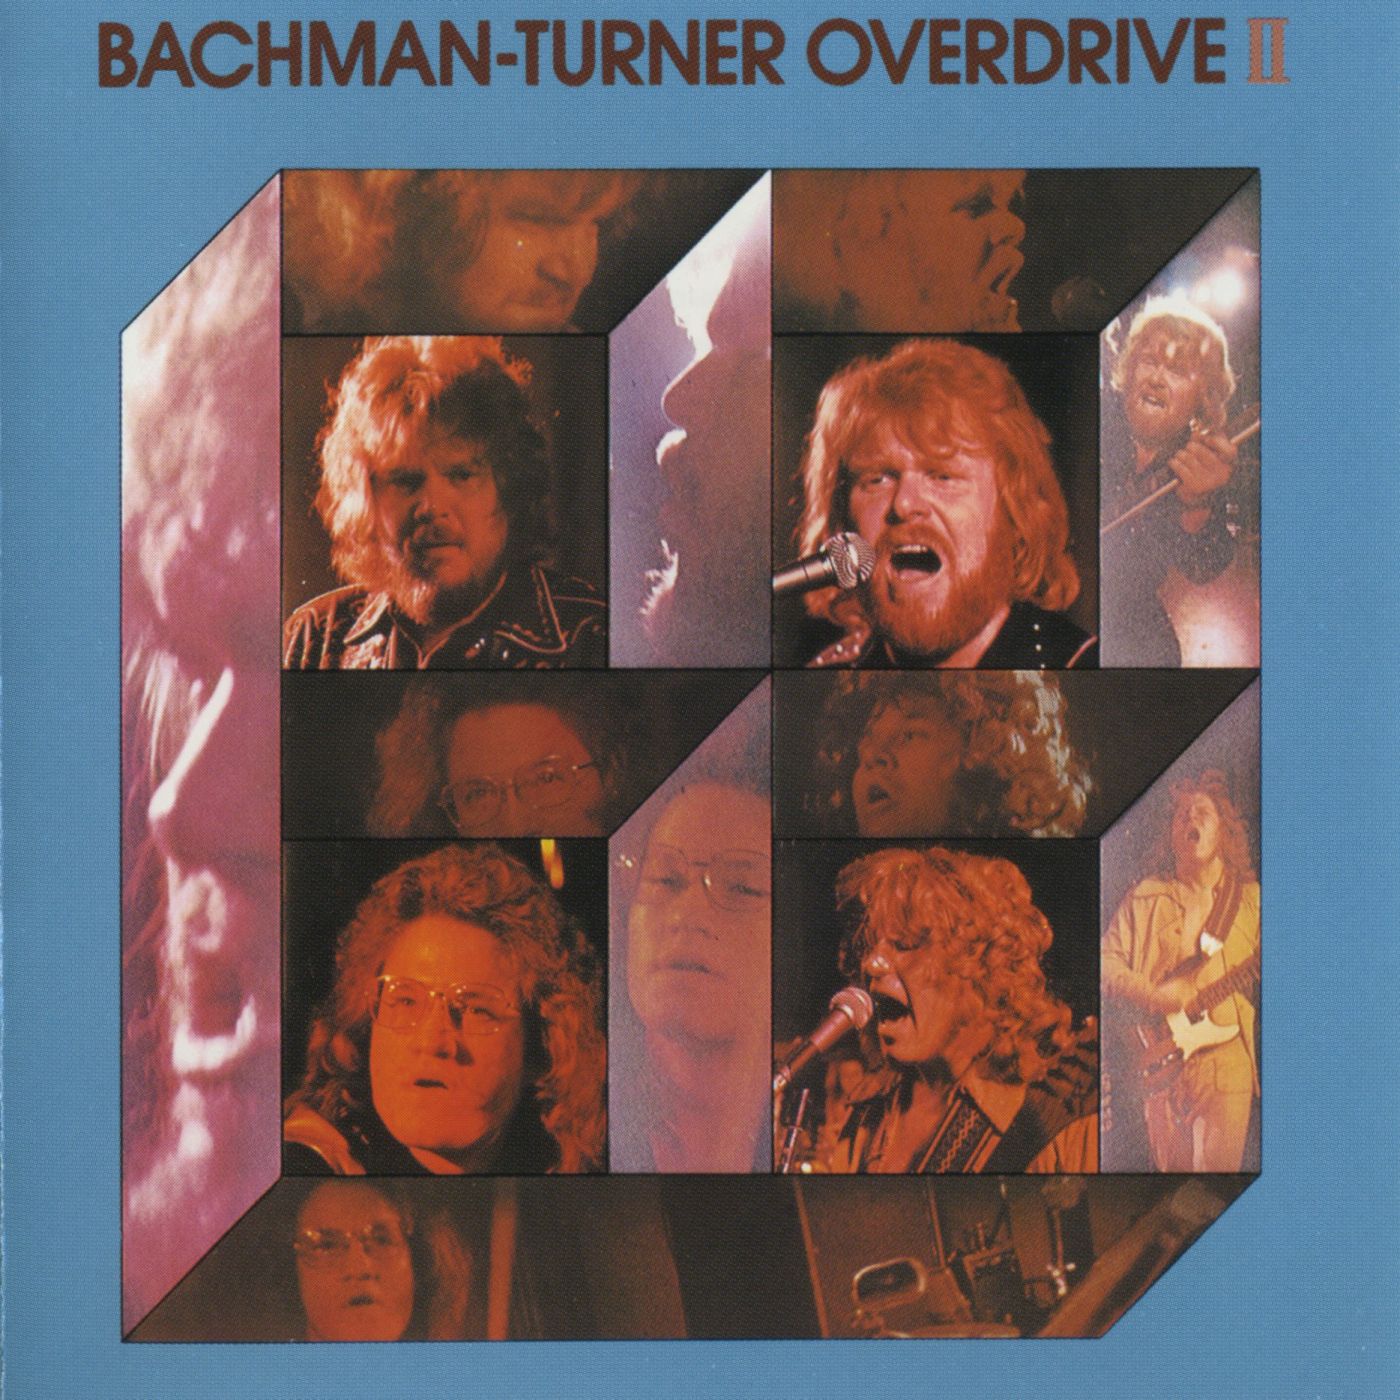 Art for Takin' Care Of Business by Bachman-Turner Overdrive